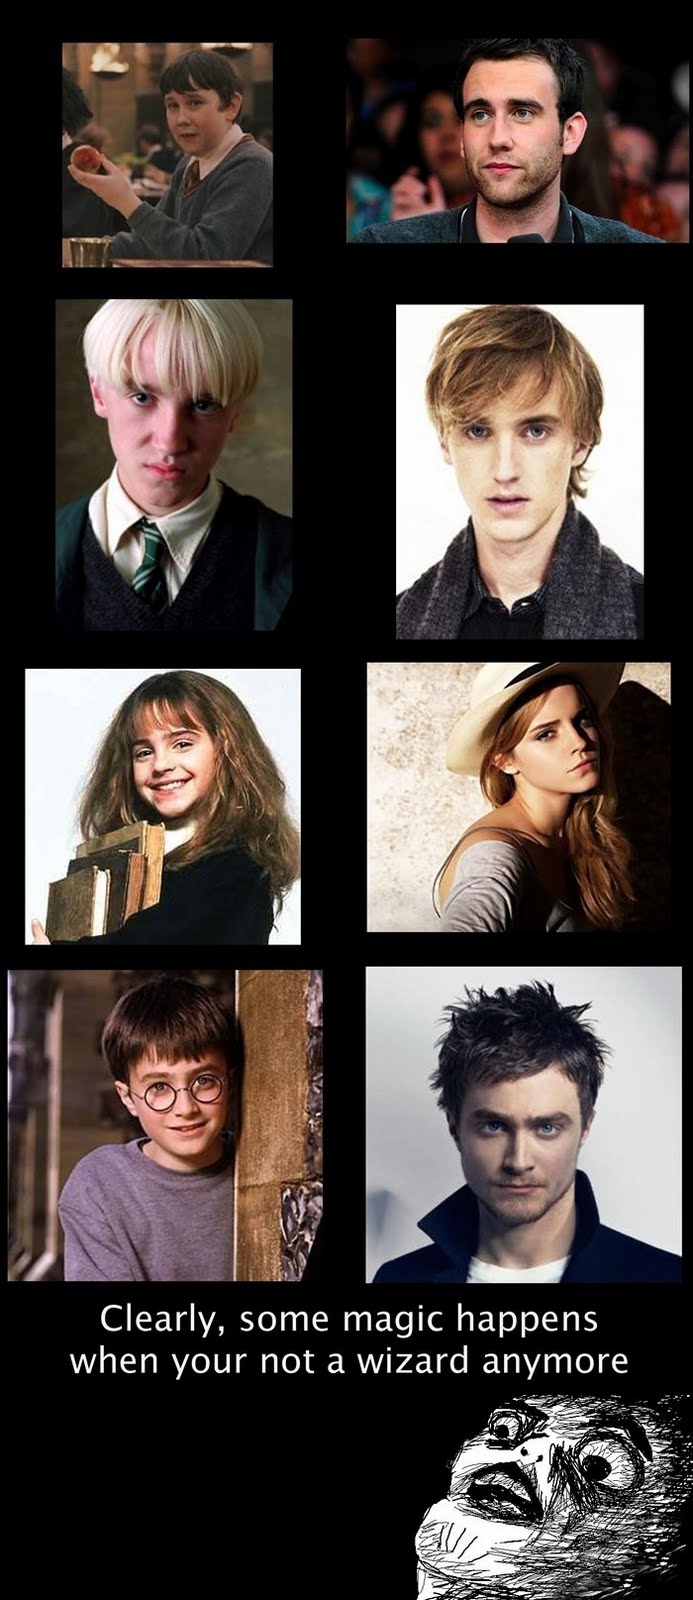 The Cast Of Harry Potter - Then And Now - Clearly, Some Magic Happens When You Are Not A Wizard Anymore